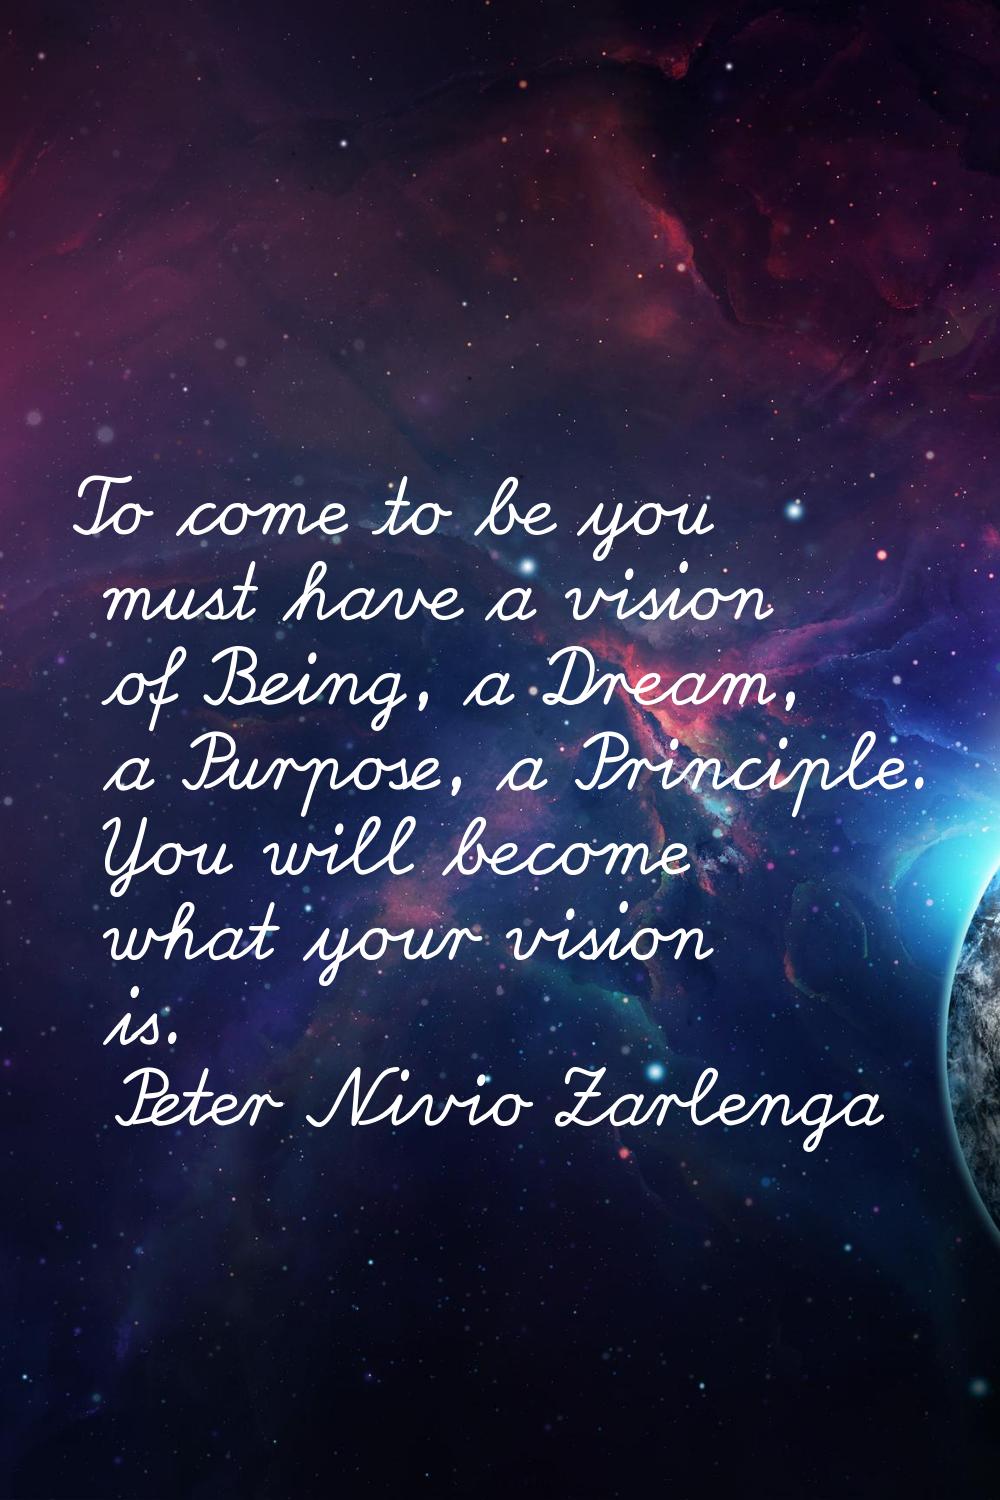 To come to be you must have a vision of Being, a Dream, a Purpose, a Principle. You will become wha